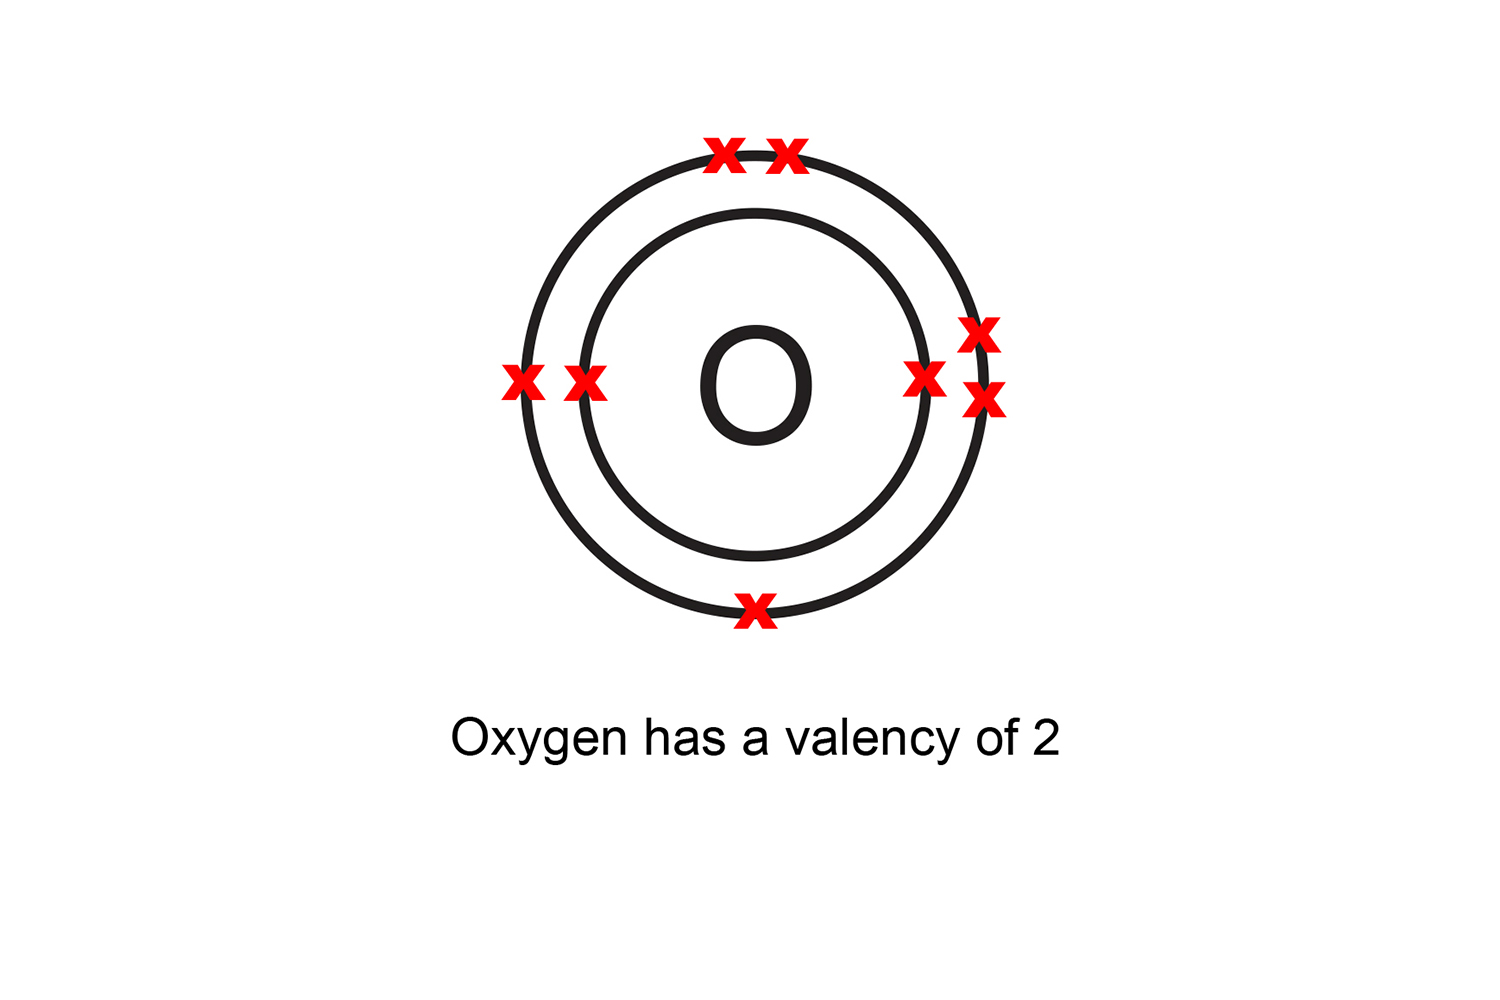 Oxygen has six electrons in its outer shell if an atom has more than 4 electrons in its outer shell it is 8 minus the number in its outer shell there fore oxygen has a valency of 2